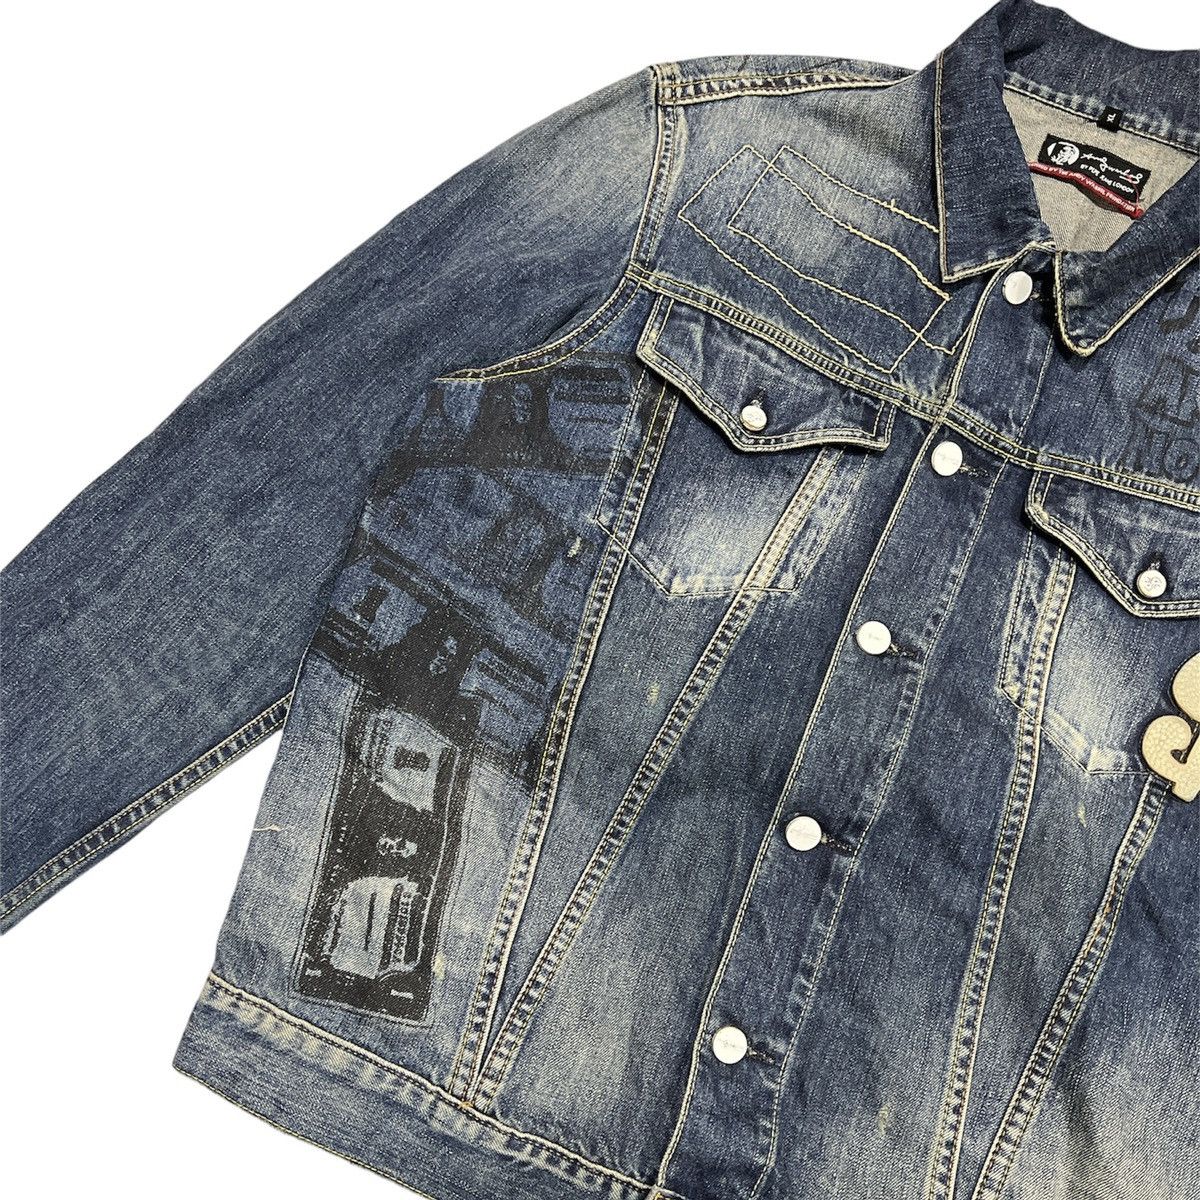 Andy Warhol by Pepe Jeans Type III Jacket - 4